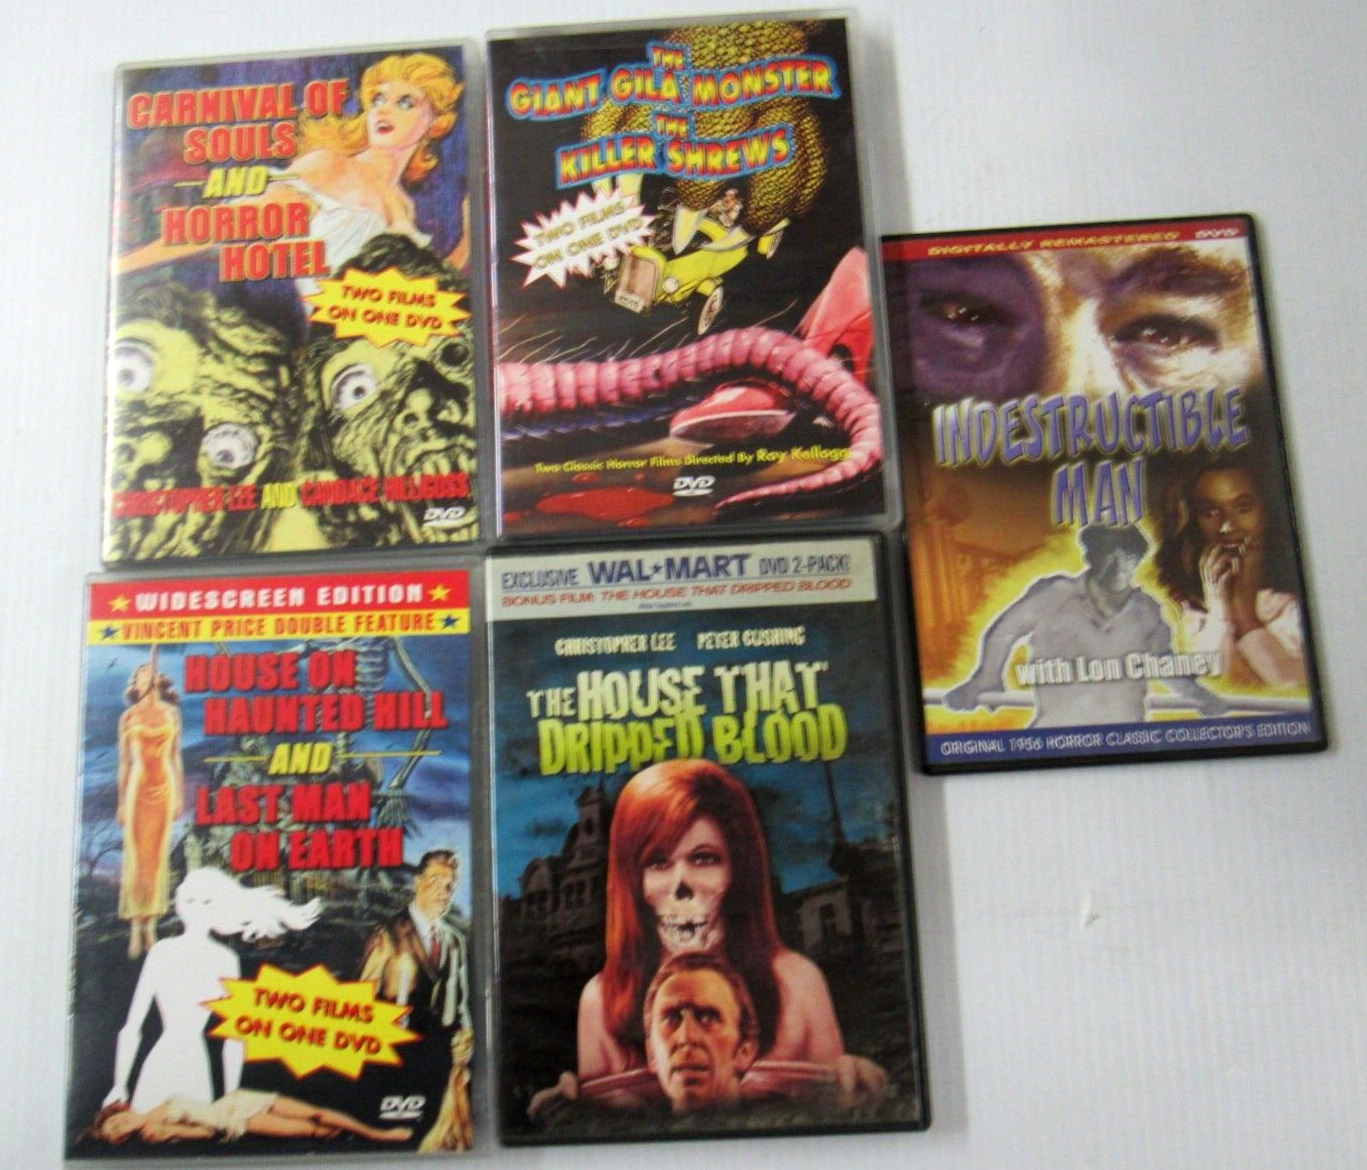 Lot of 5 Vintage B Horror Dvds From 1950s & 1960s 8 Films